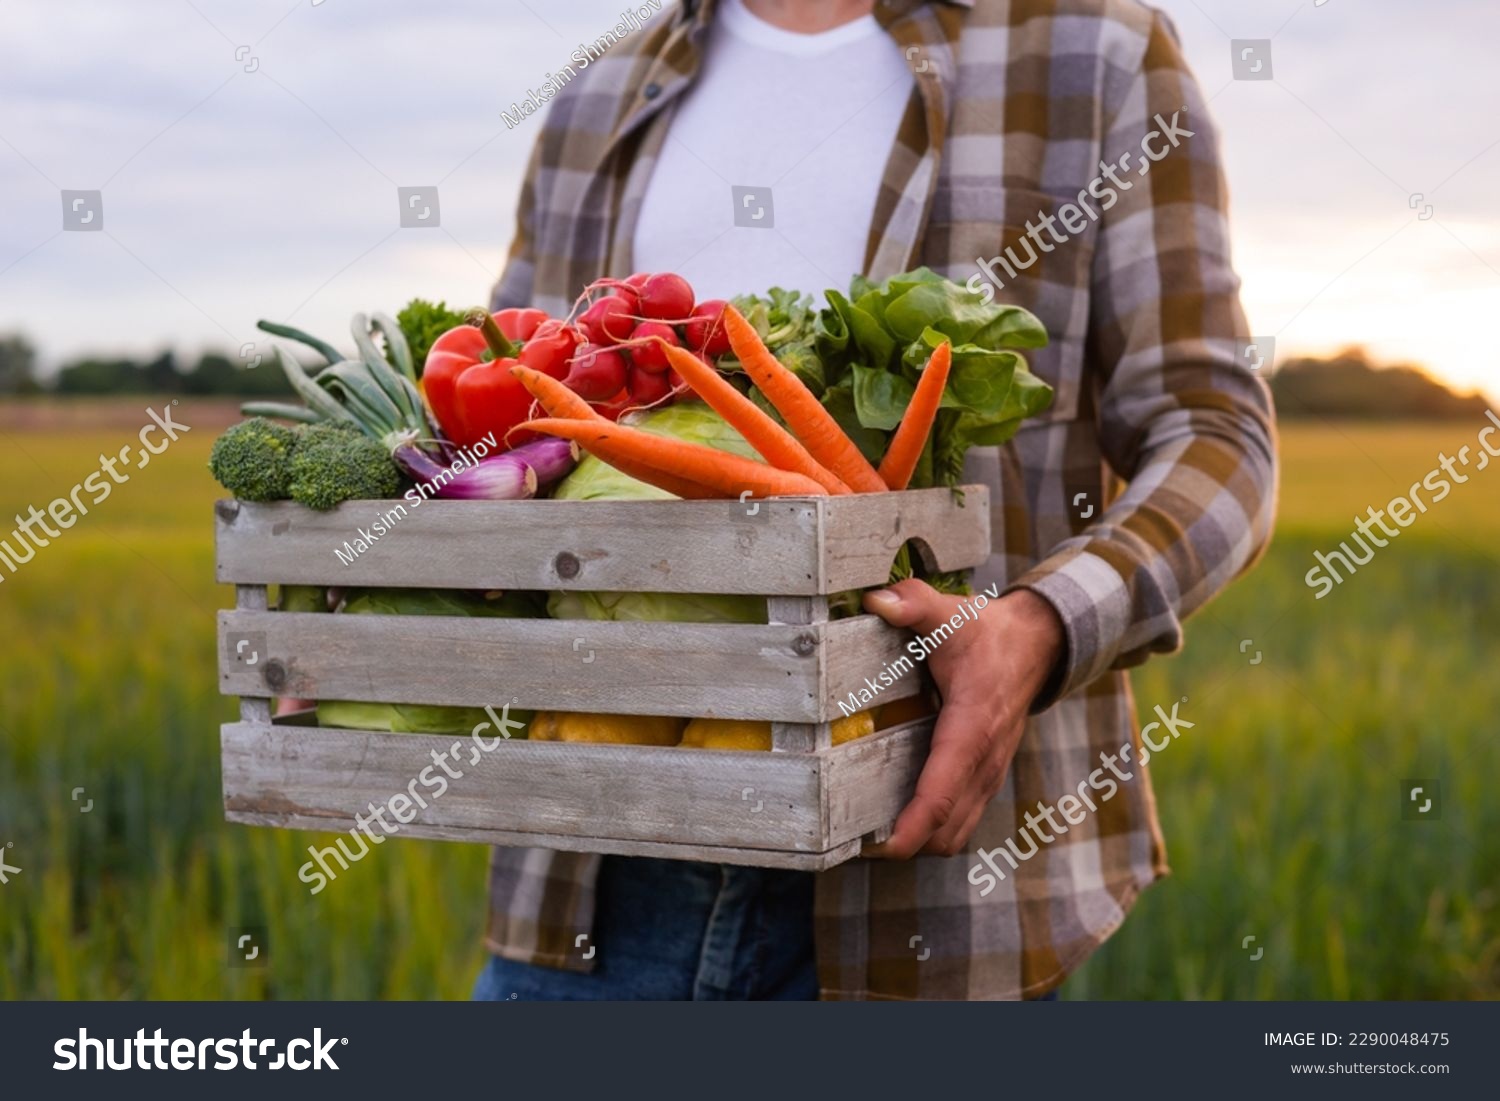 Farmer with a vegetable box in front of a sunset agricultural landscape. Man in a countryside field. Country life, food production, farming and country lifestyle concept. #2290048475